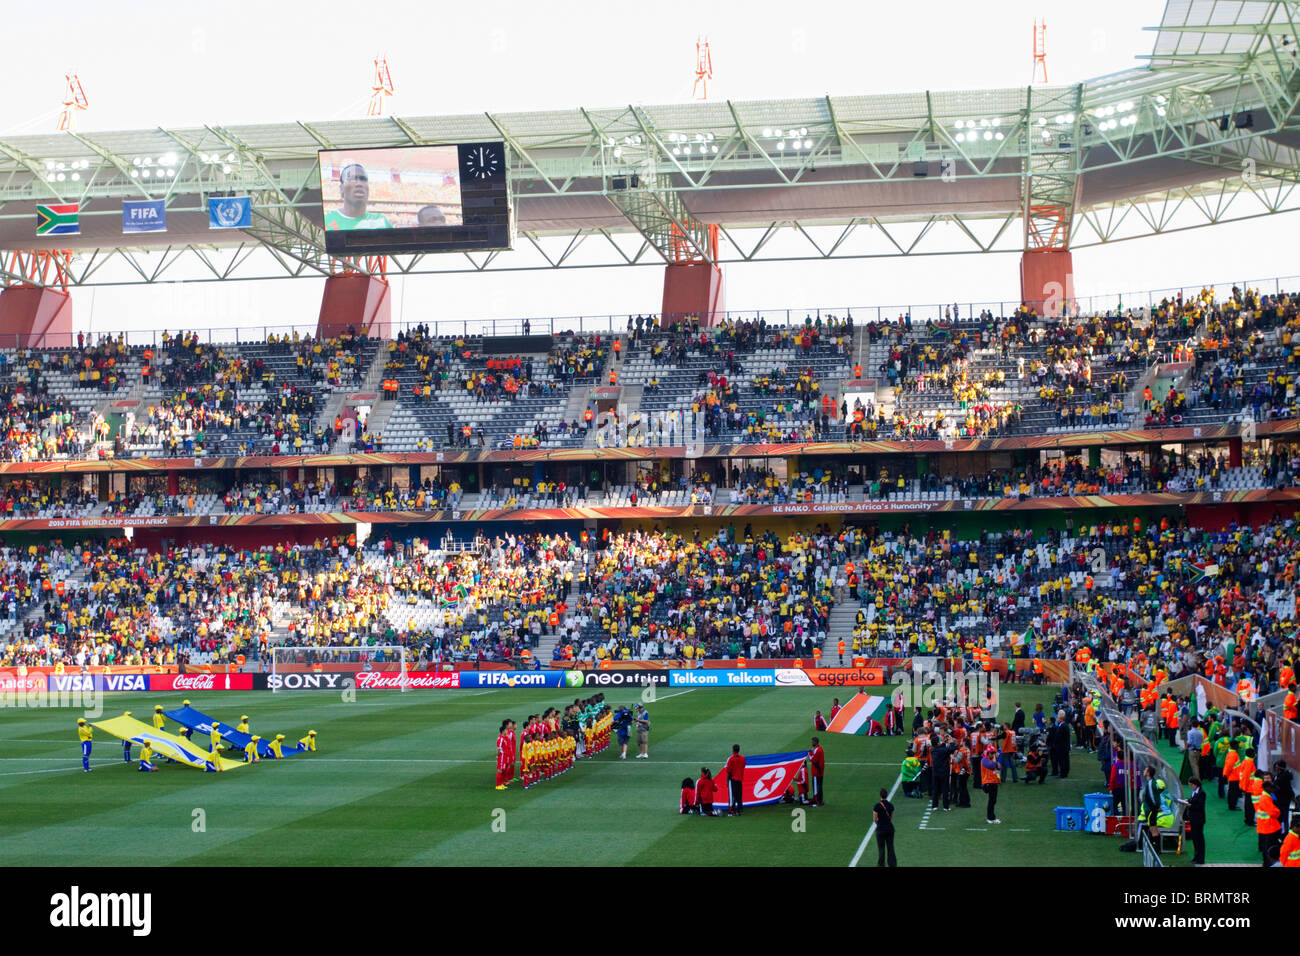 Players line up for the national anthems at the Mbombela stadium in the 2010 World Cup. Drogba on Big screen. Stock Photo